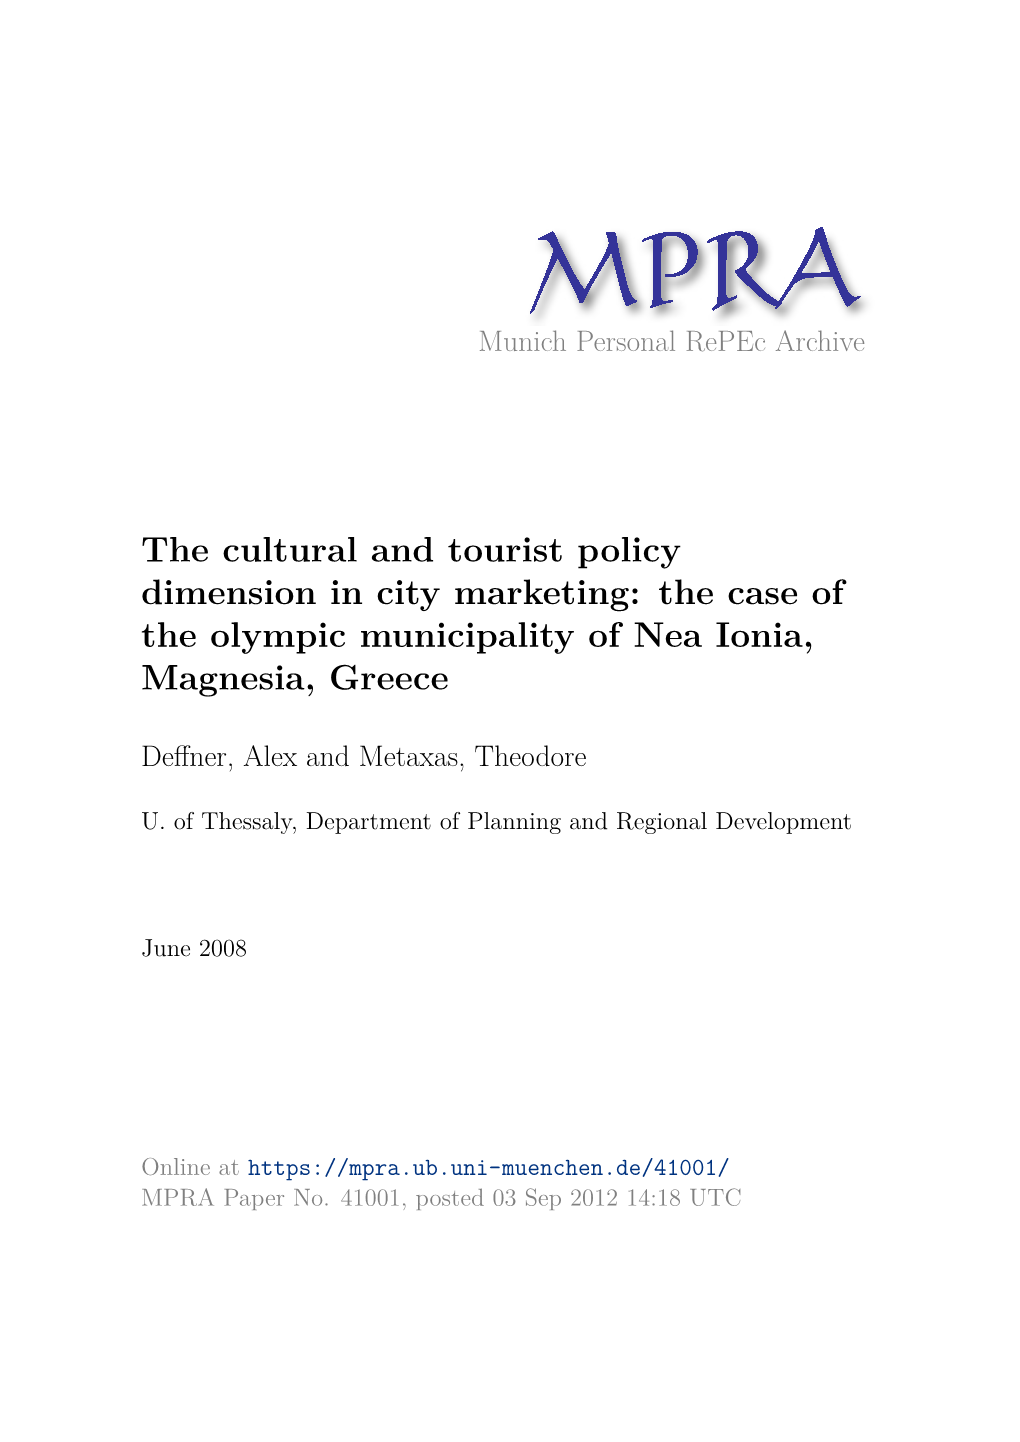 The Cultural and Tourist Policy Dimension in City Marketing: the Case of the Olympic Municipality of Nea Ionia, Magnesia, Greece